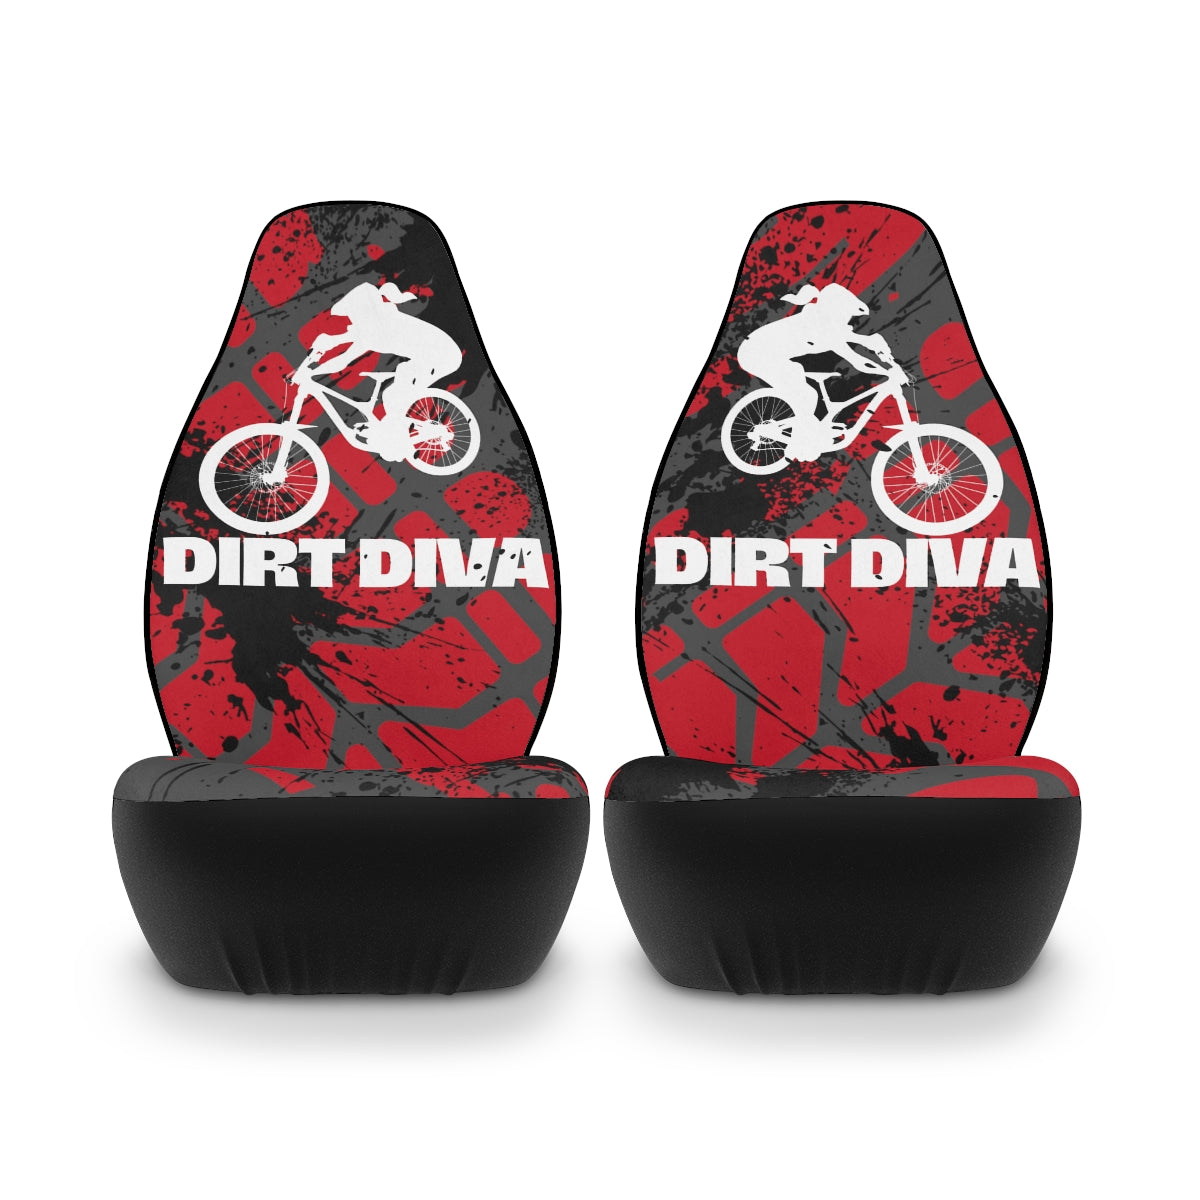 Dirt Diva - Car Seat Covers -  Red - Set of 2 - Car - Truck - SUV